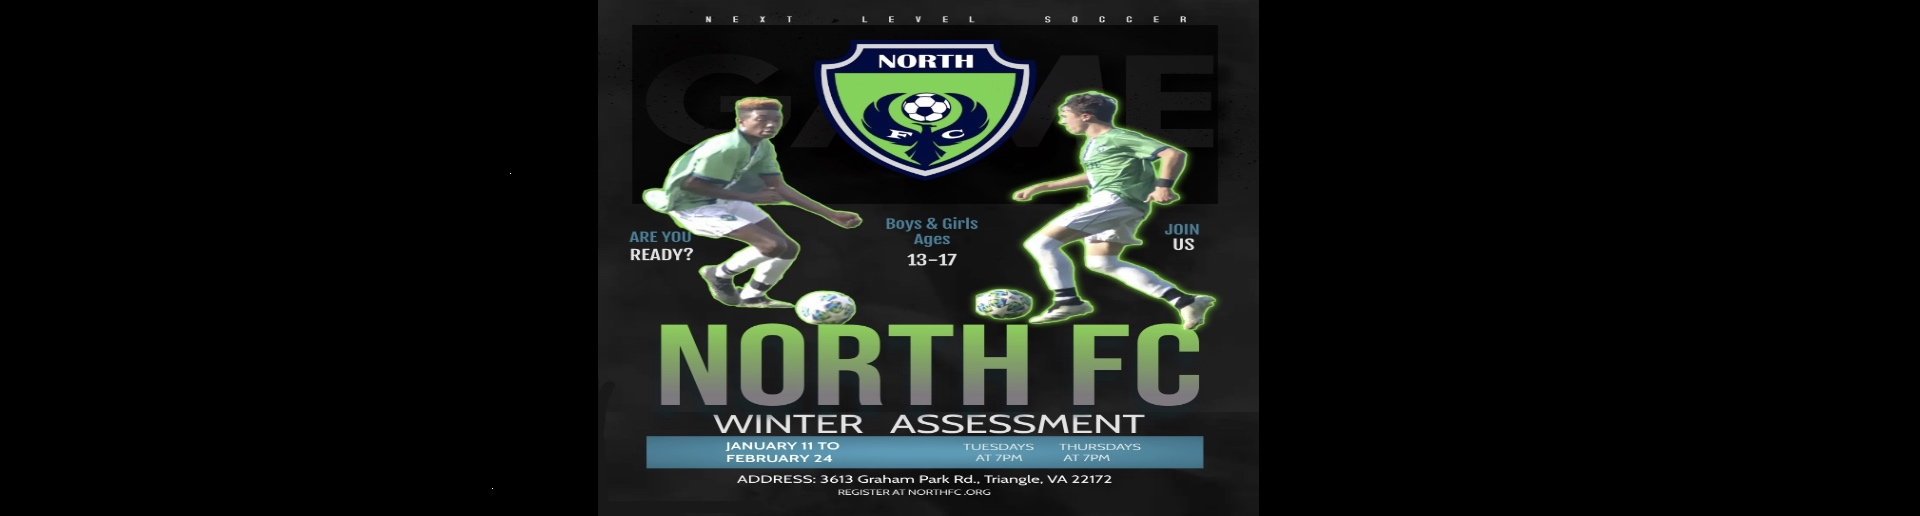 Join North FC!